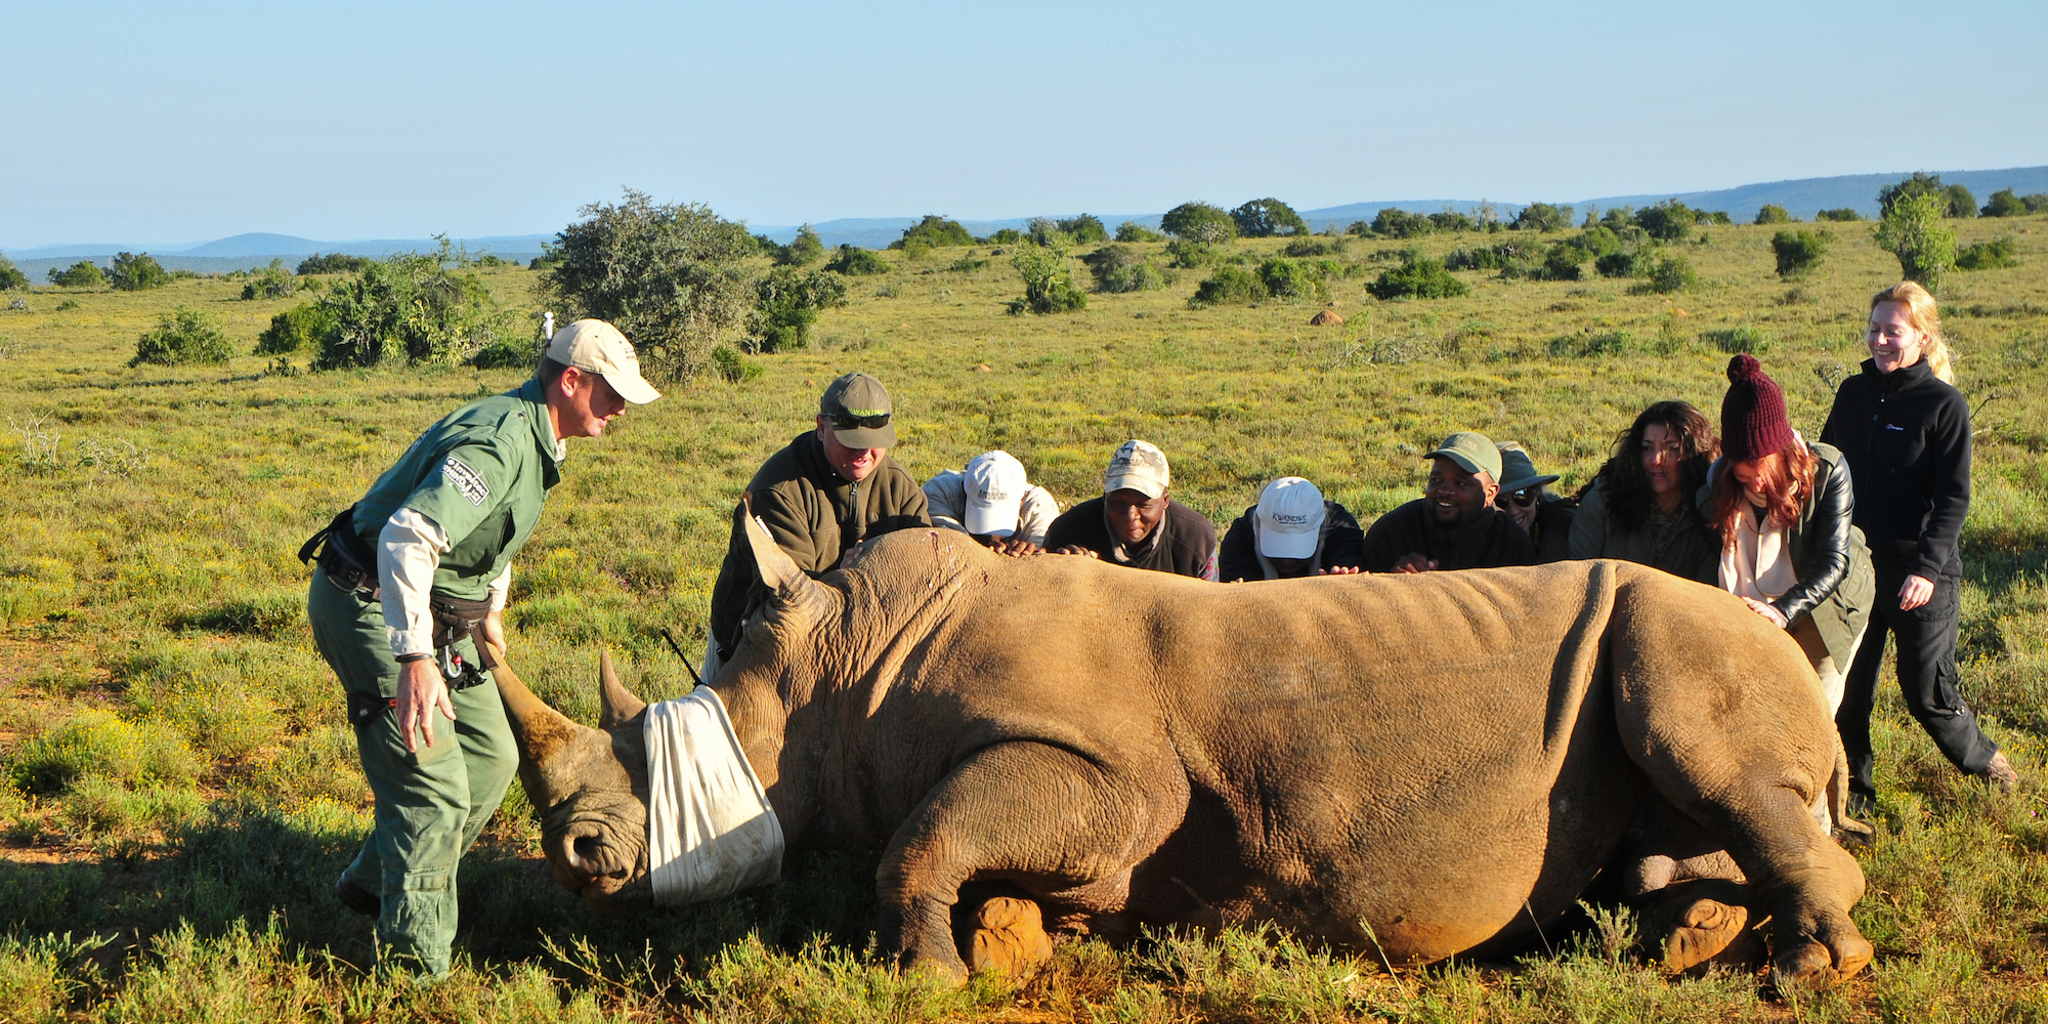 Earth Day Rhino Conservation